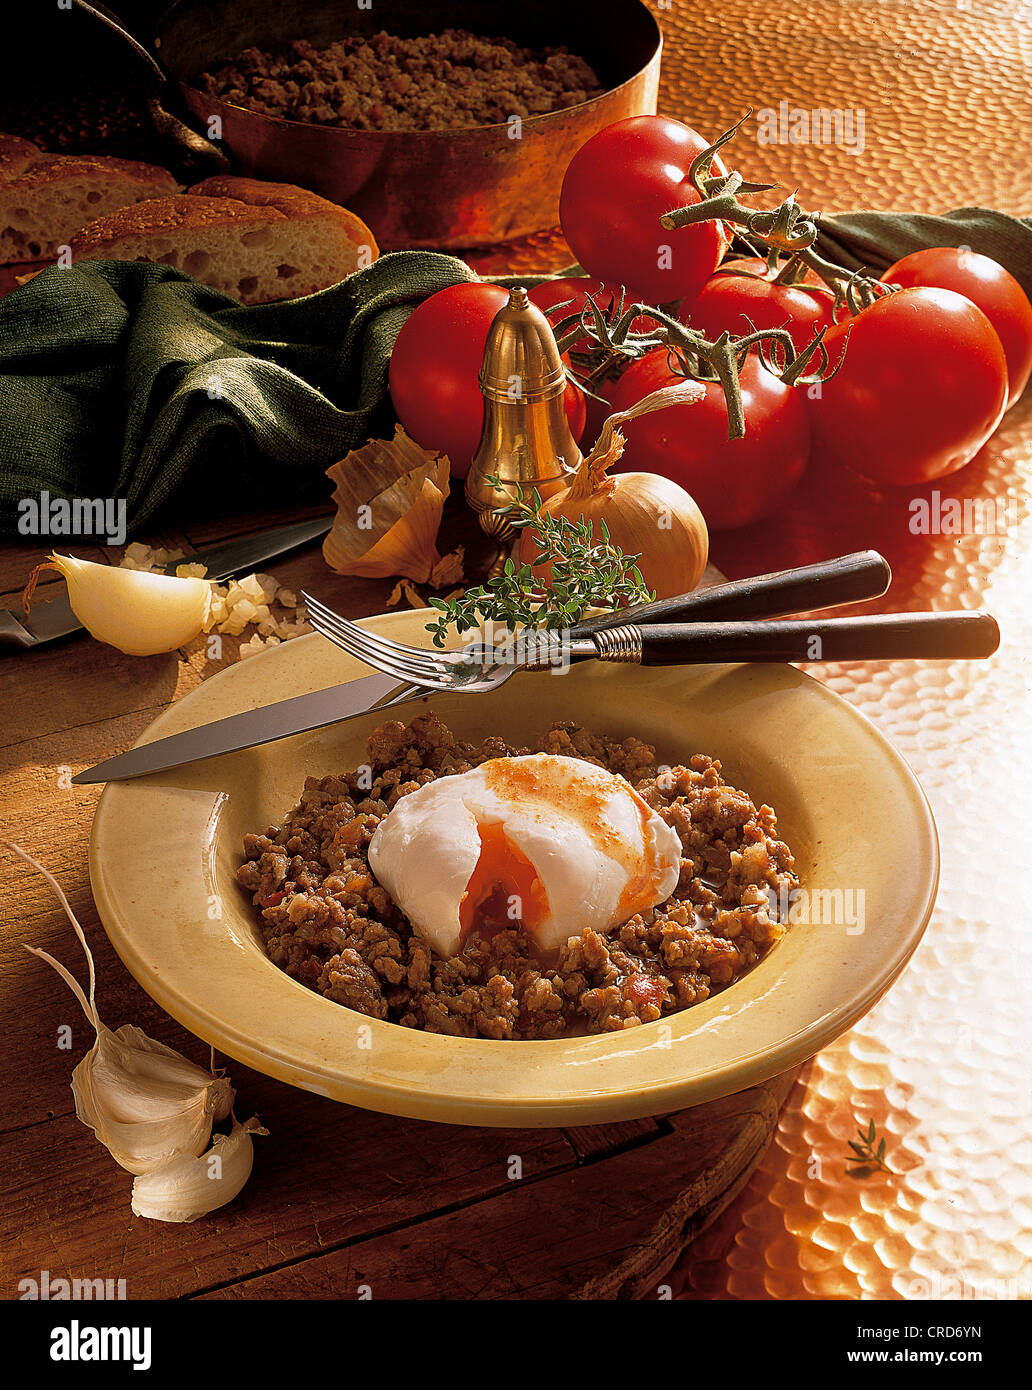 Turkish-style poached eggs on spicy minced beef, Turkey. Stock Photo